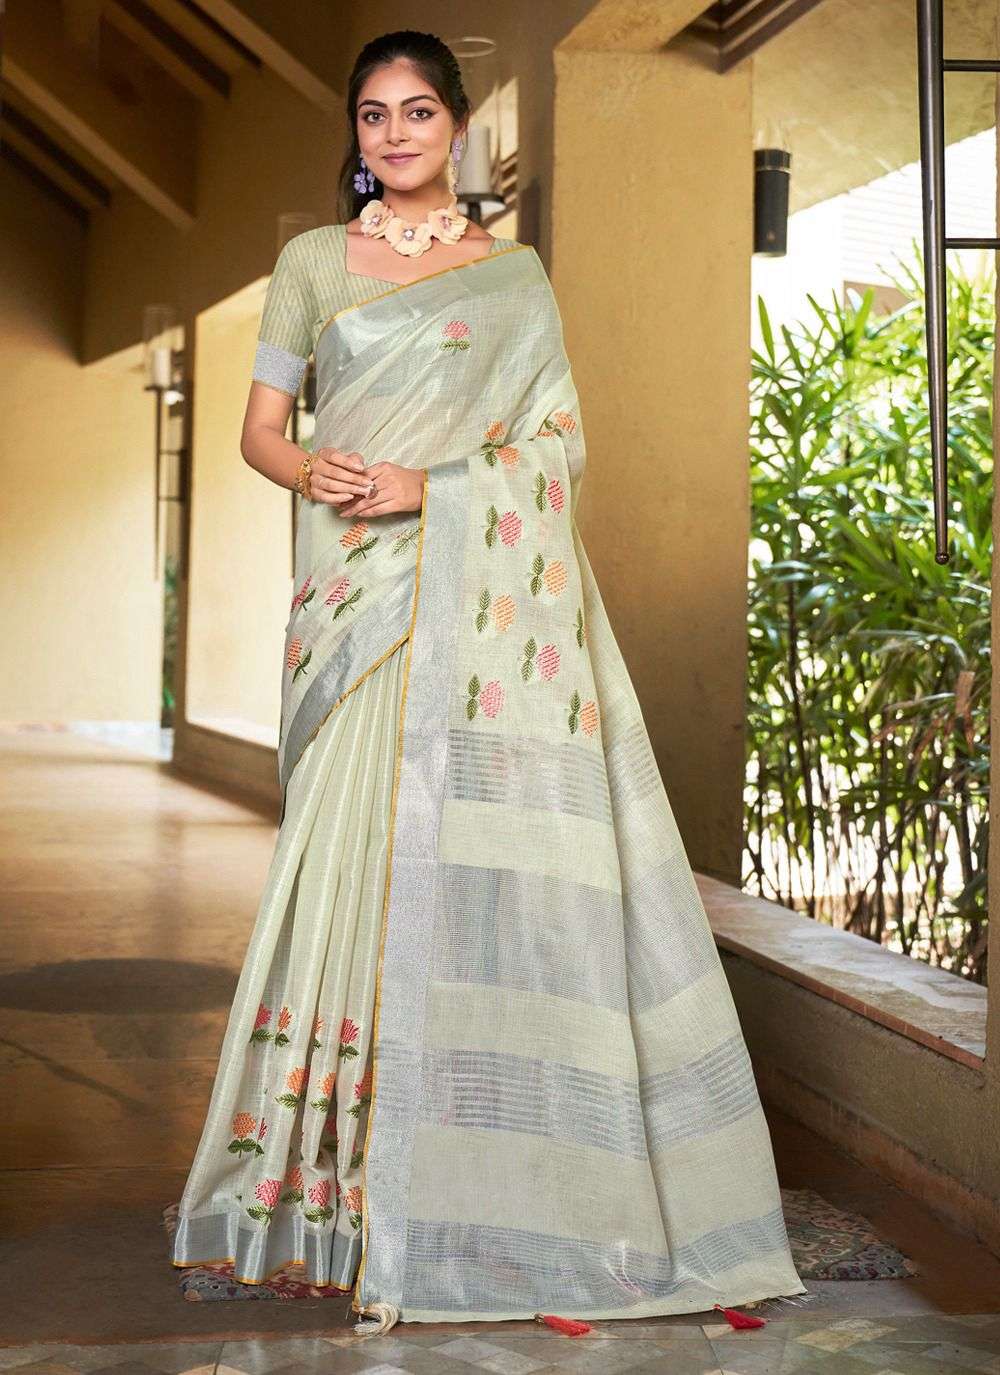 sangam print Linen Queen with flower printed saree collectio...